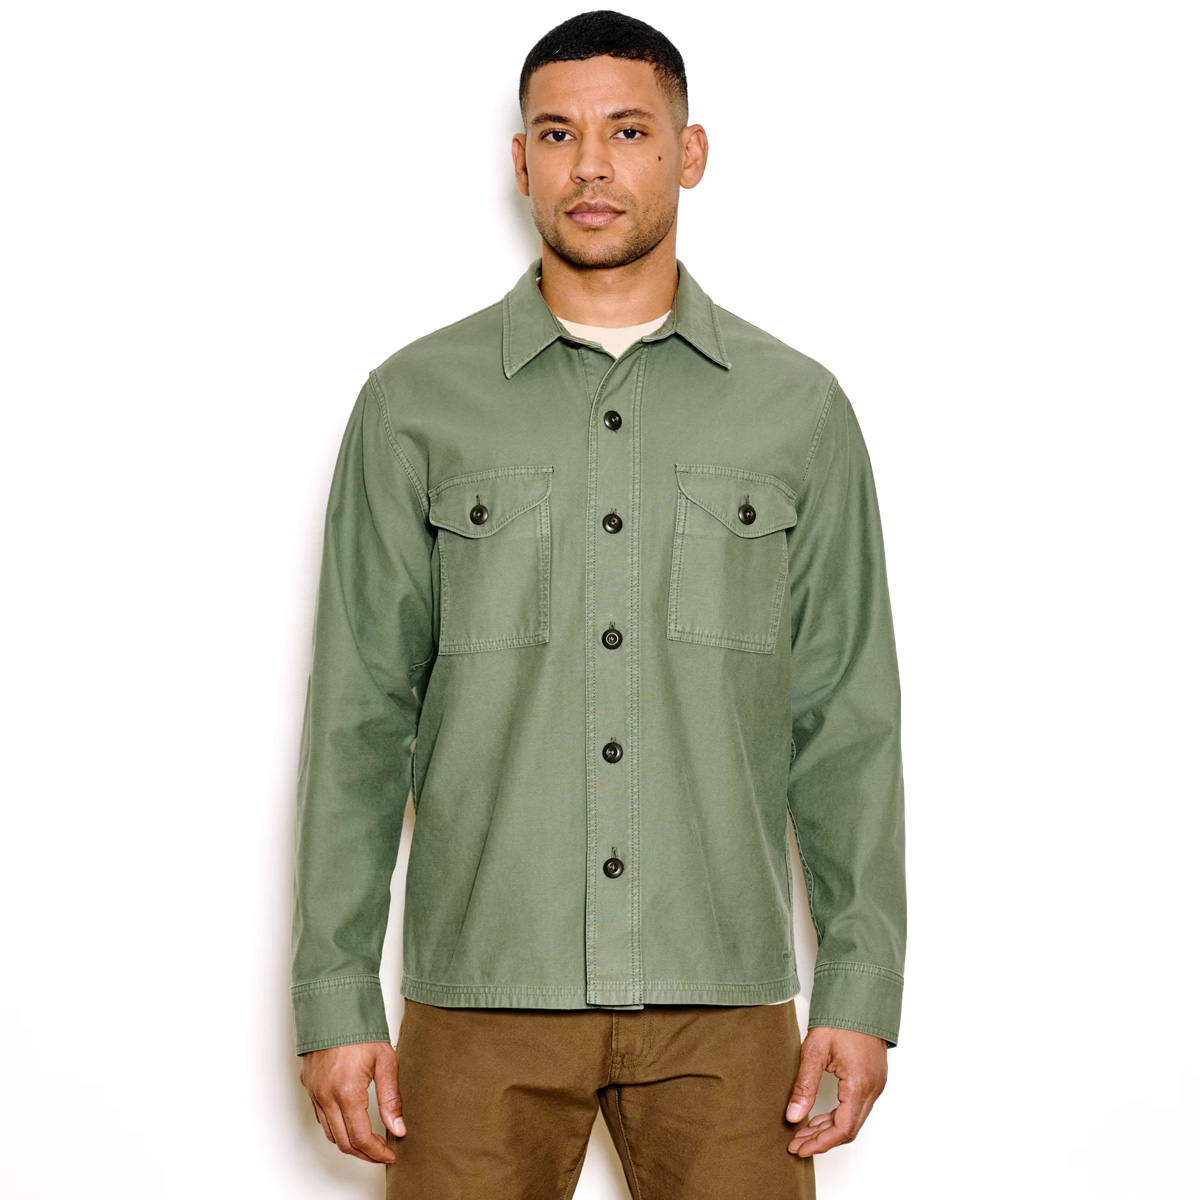 Filson Field Jac-Shirt, made of strong midweight fabric with a reverse-sateen weave, smooth on the inside for easy layering